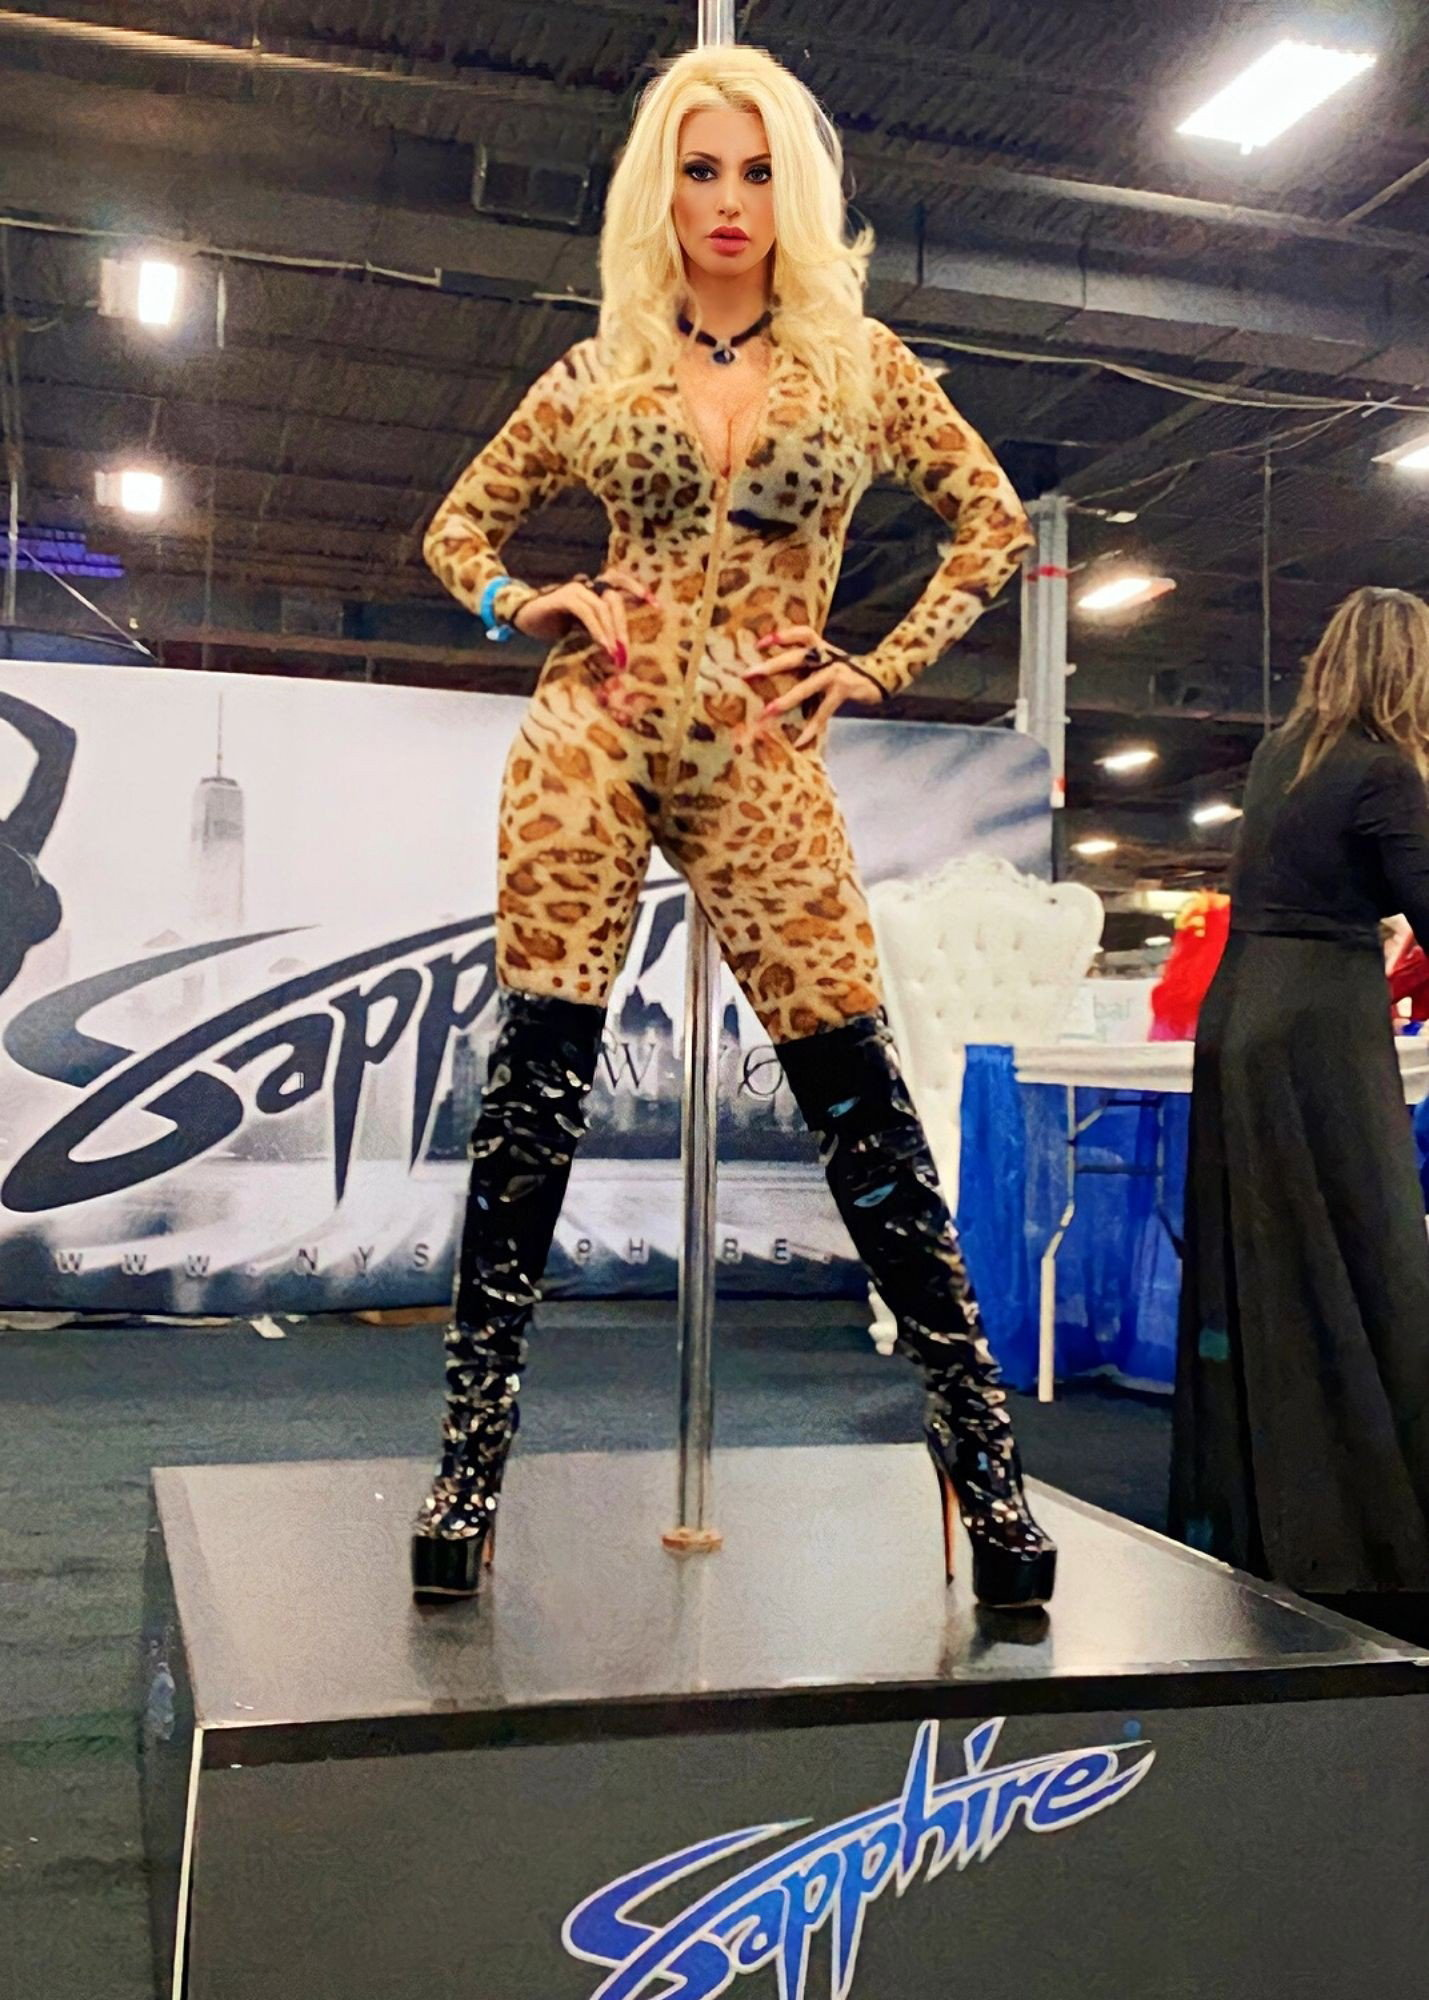 Photo by BrittanyAndrews with the username @BrittanyAndrews, who is a star user,  October 22, 2022 at 3:39 PM and the text says 'DAY 1 of @EXXXOTICA #EdisonNJ - Rockin' My Sexy Leopard Outfit & Black Boots at the Sapphire's Booth #ExxxoticaNJ #Exxxotica2022 #NewJersey #BrittanyAndrews'